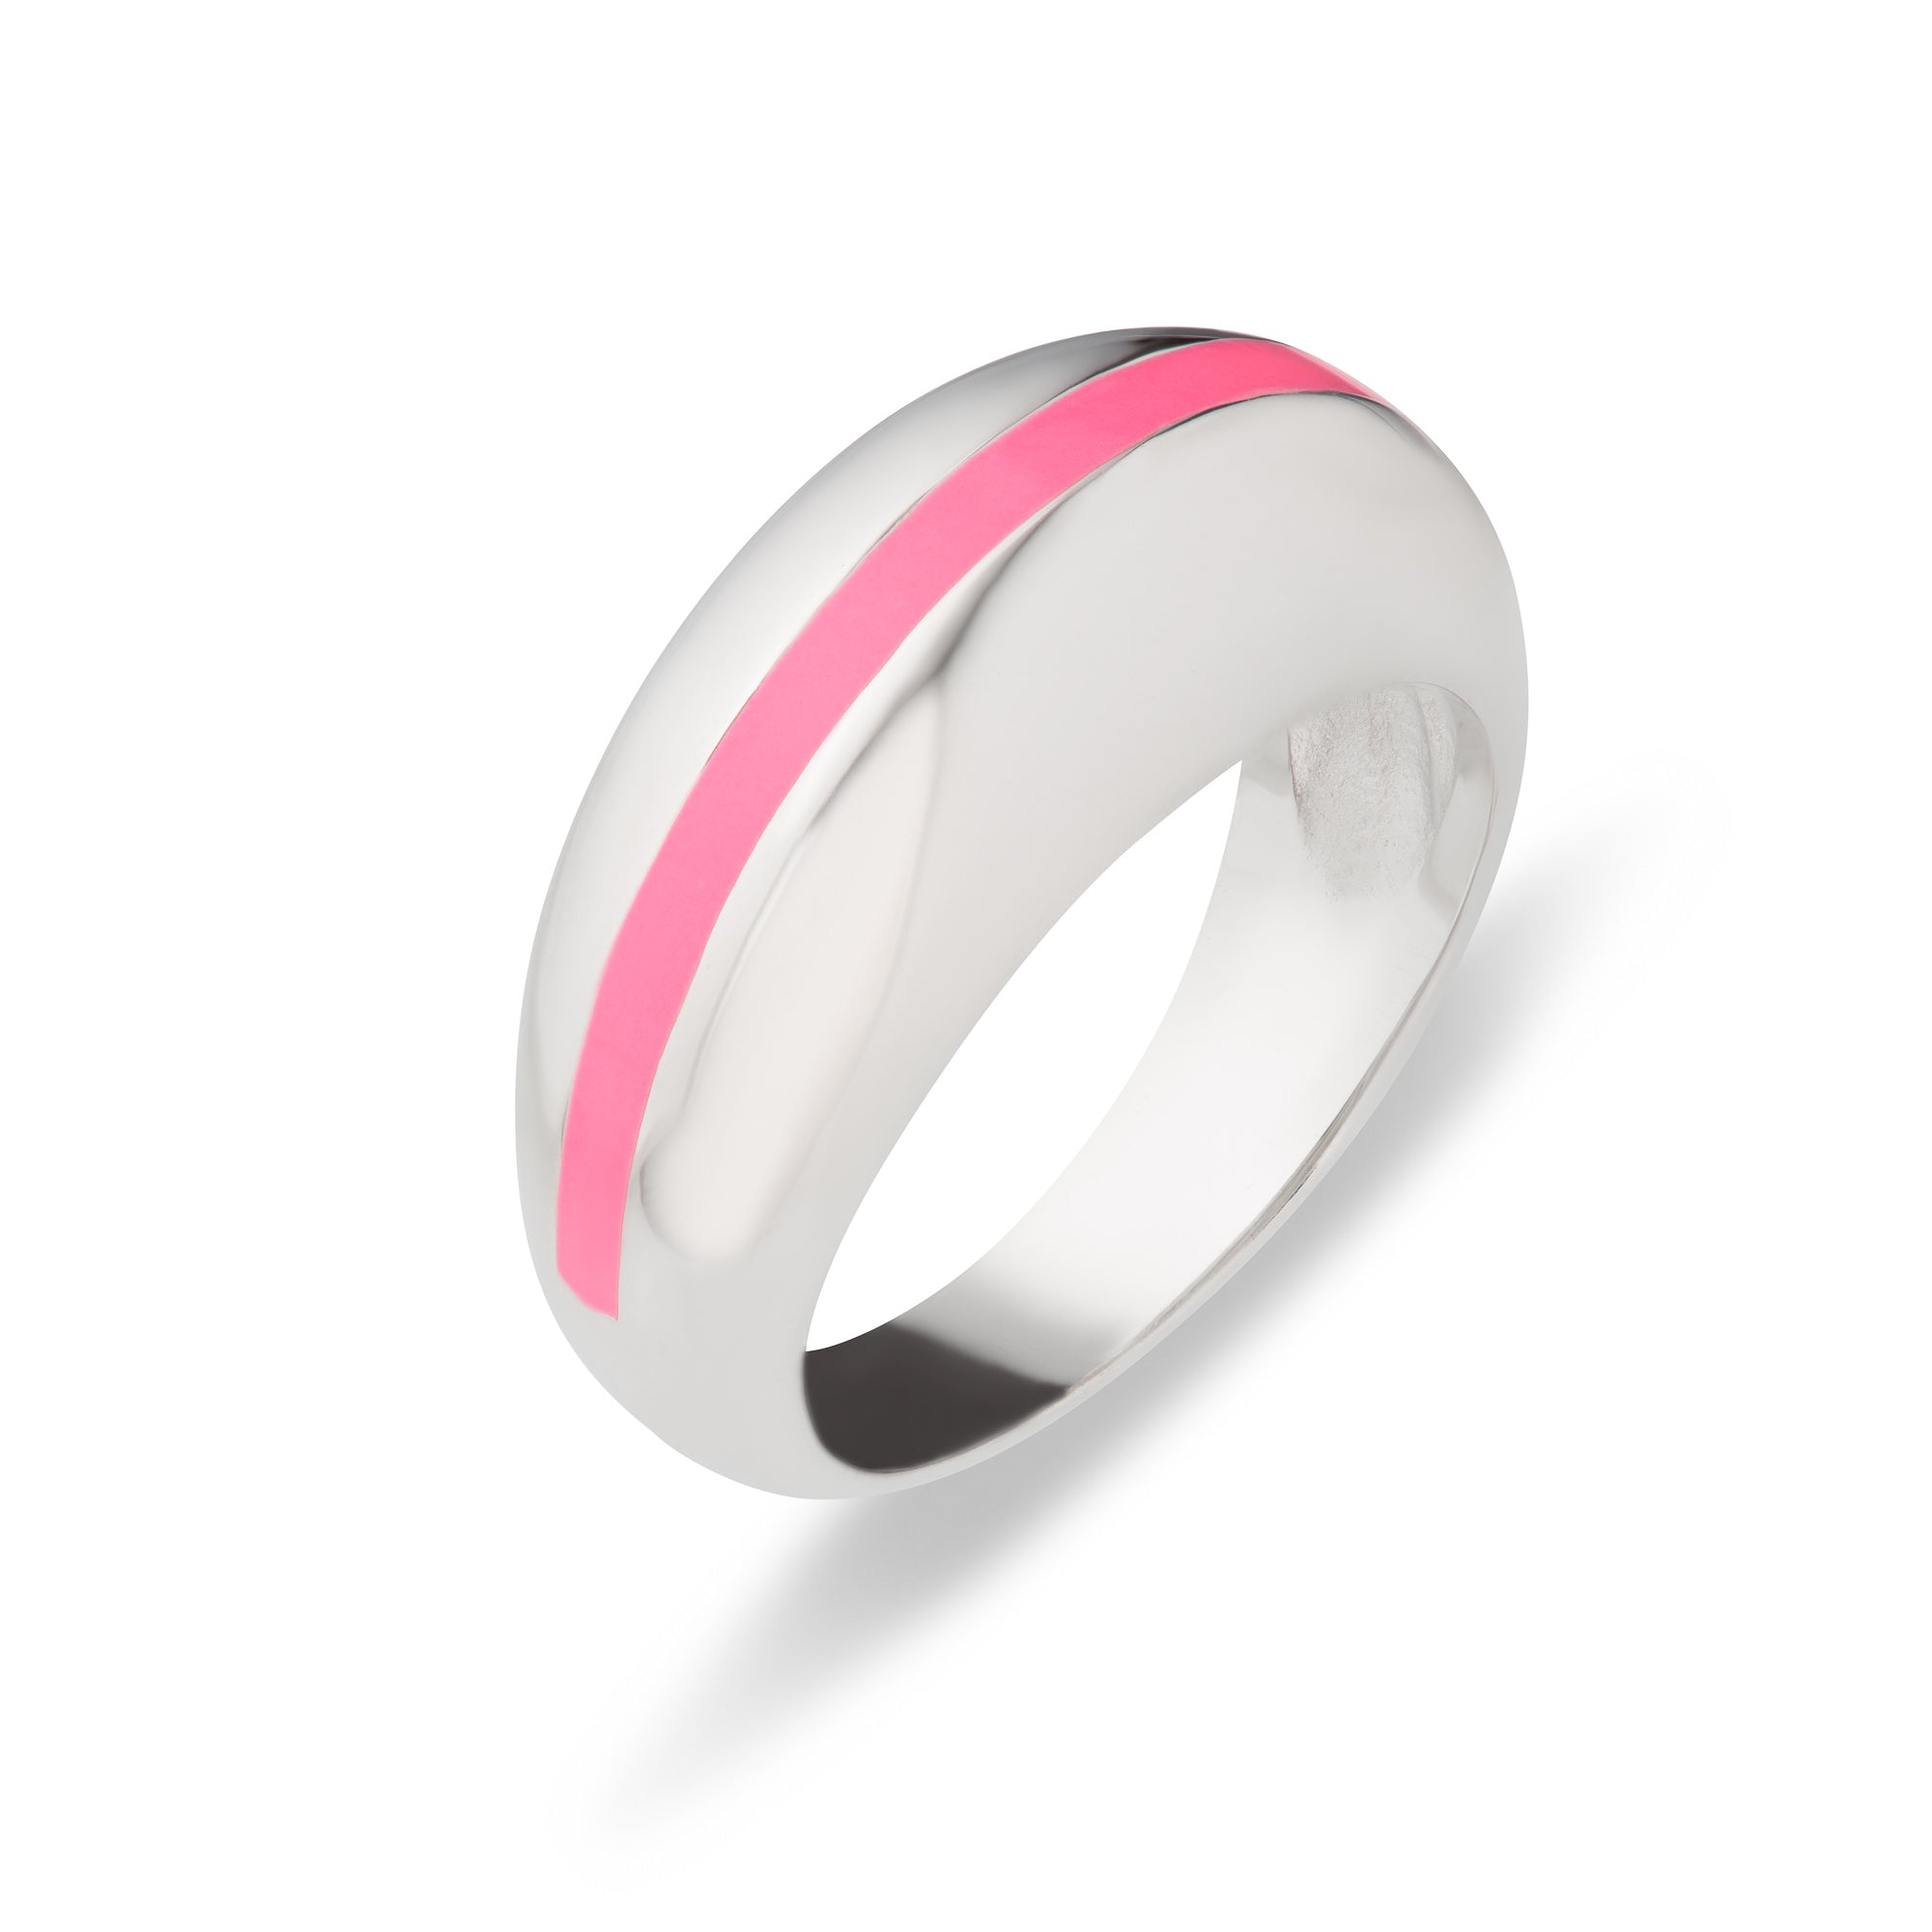 Candy Stripe Dome Ring in Neon Pink